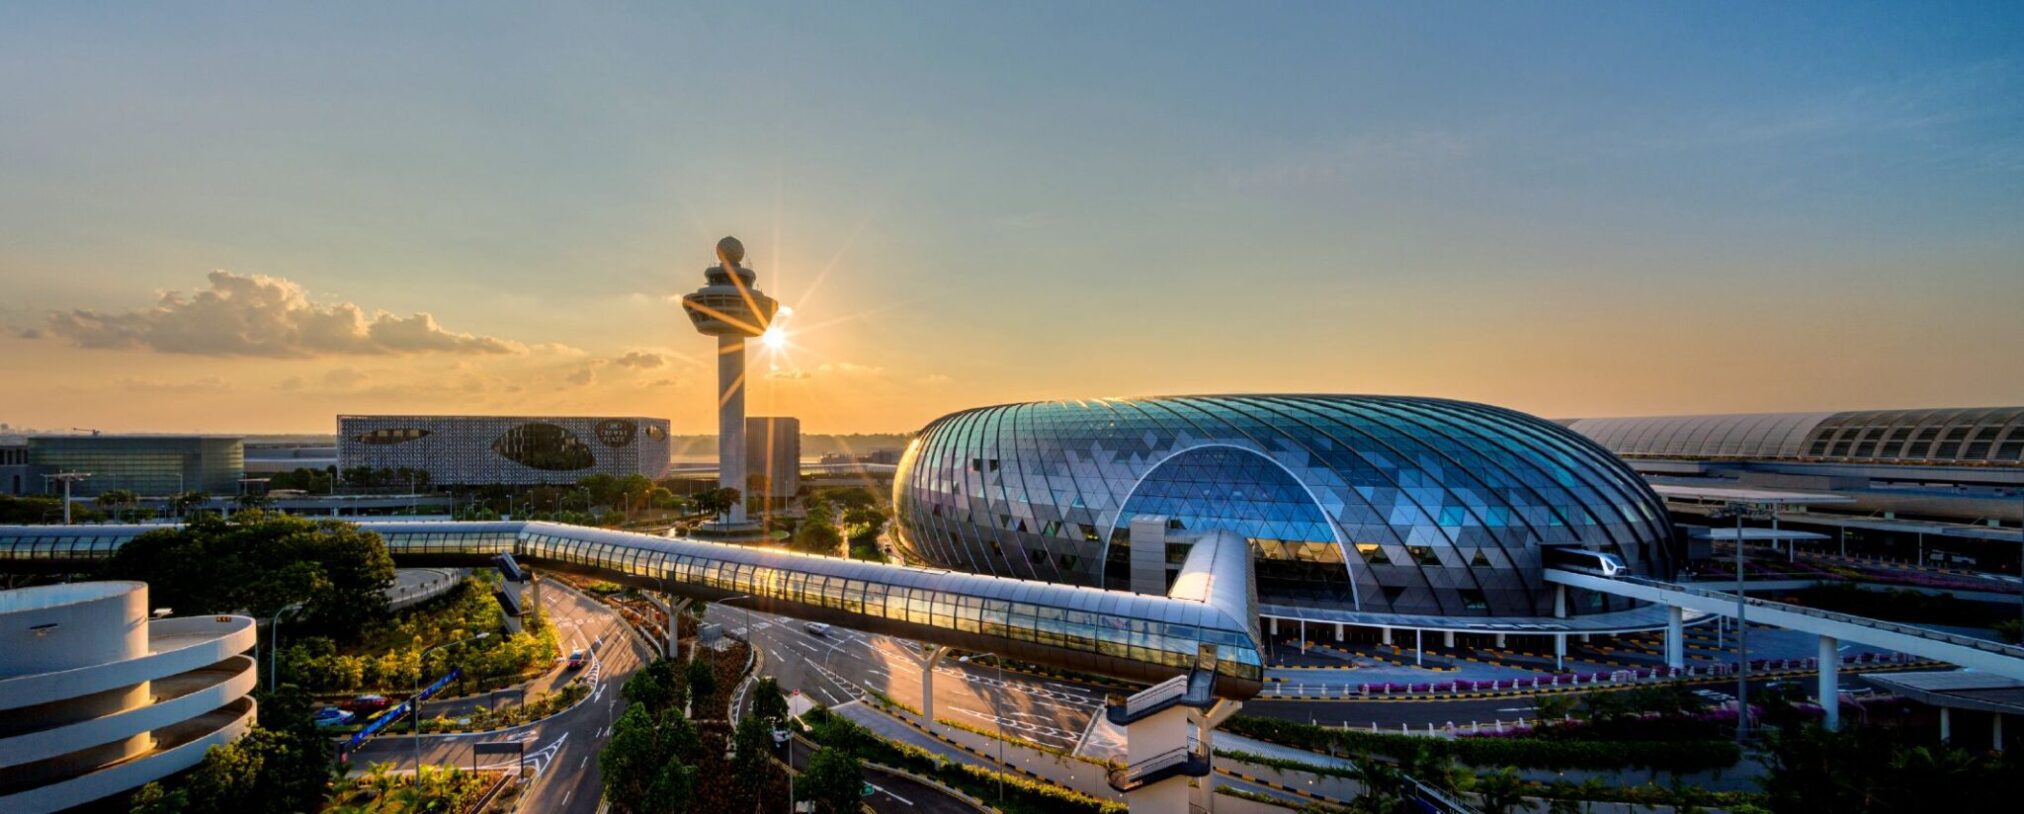 Singapore Changi one of the safest airports in the world